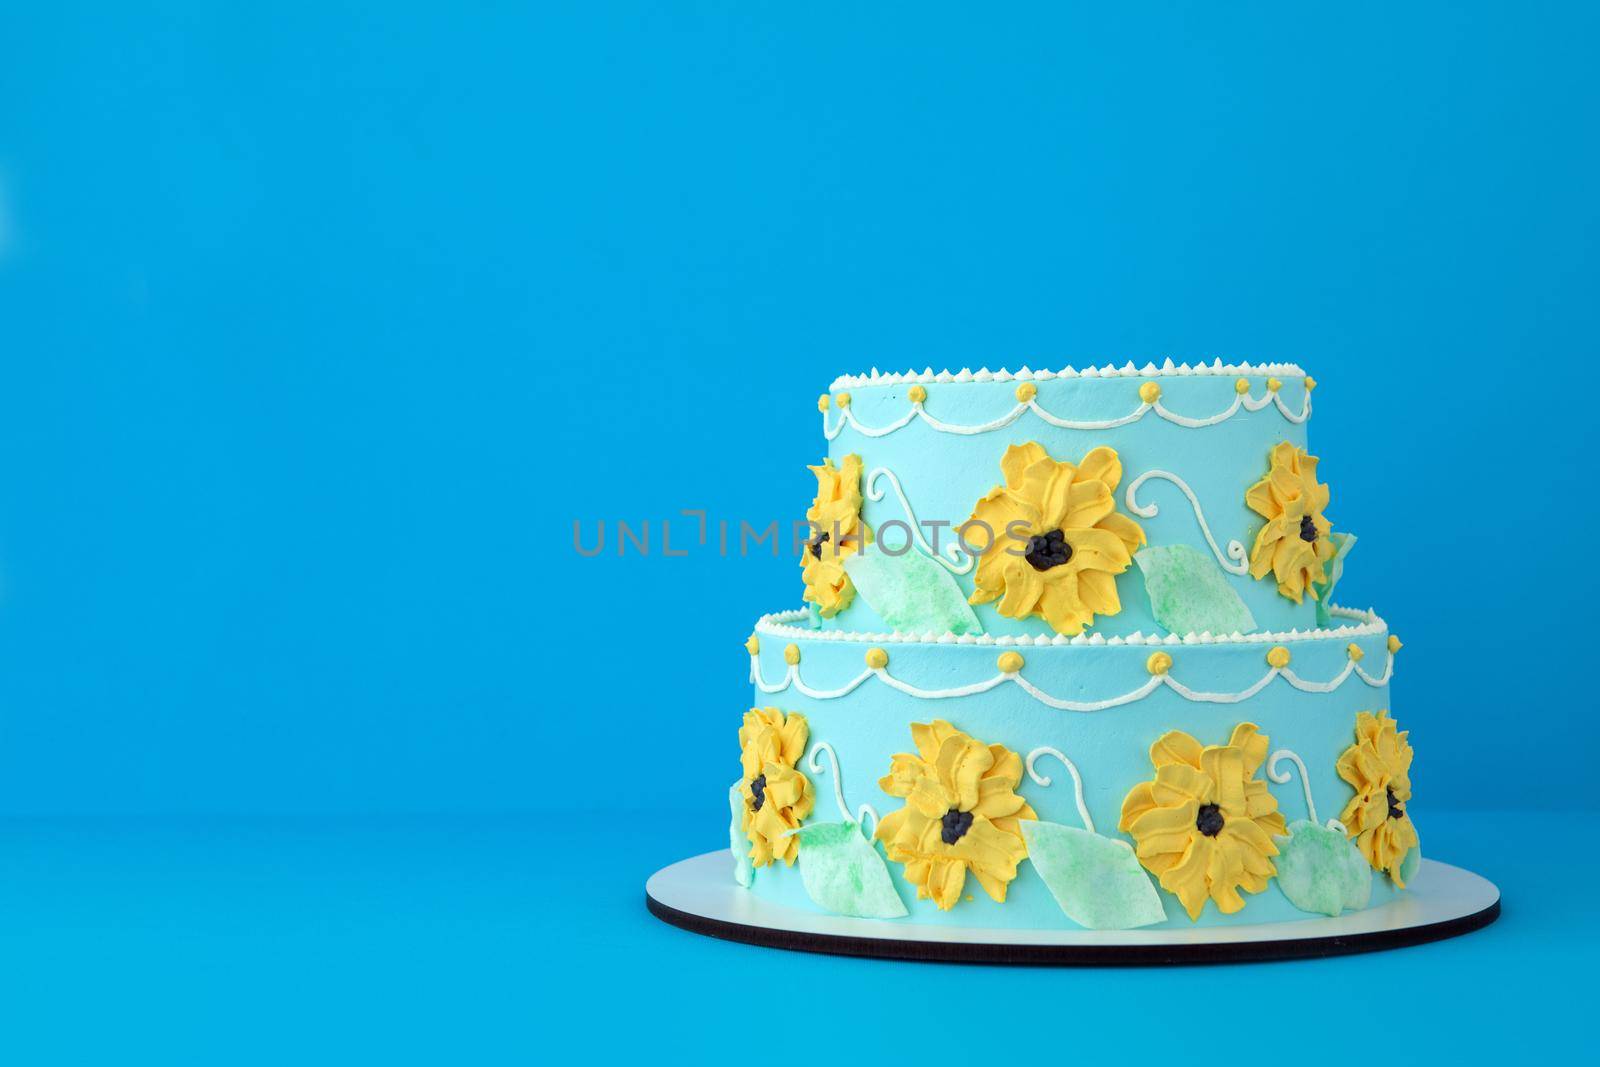 Cake with sunflowers flowers on a blue background by Demkat